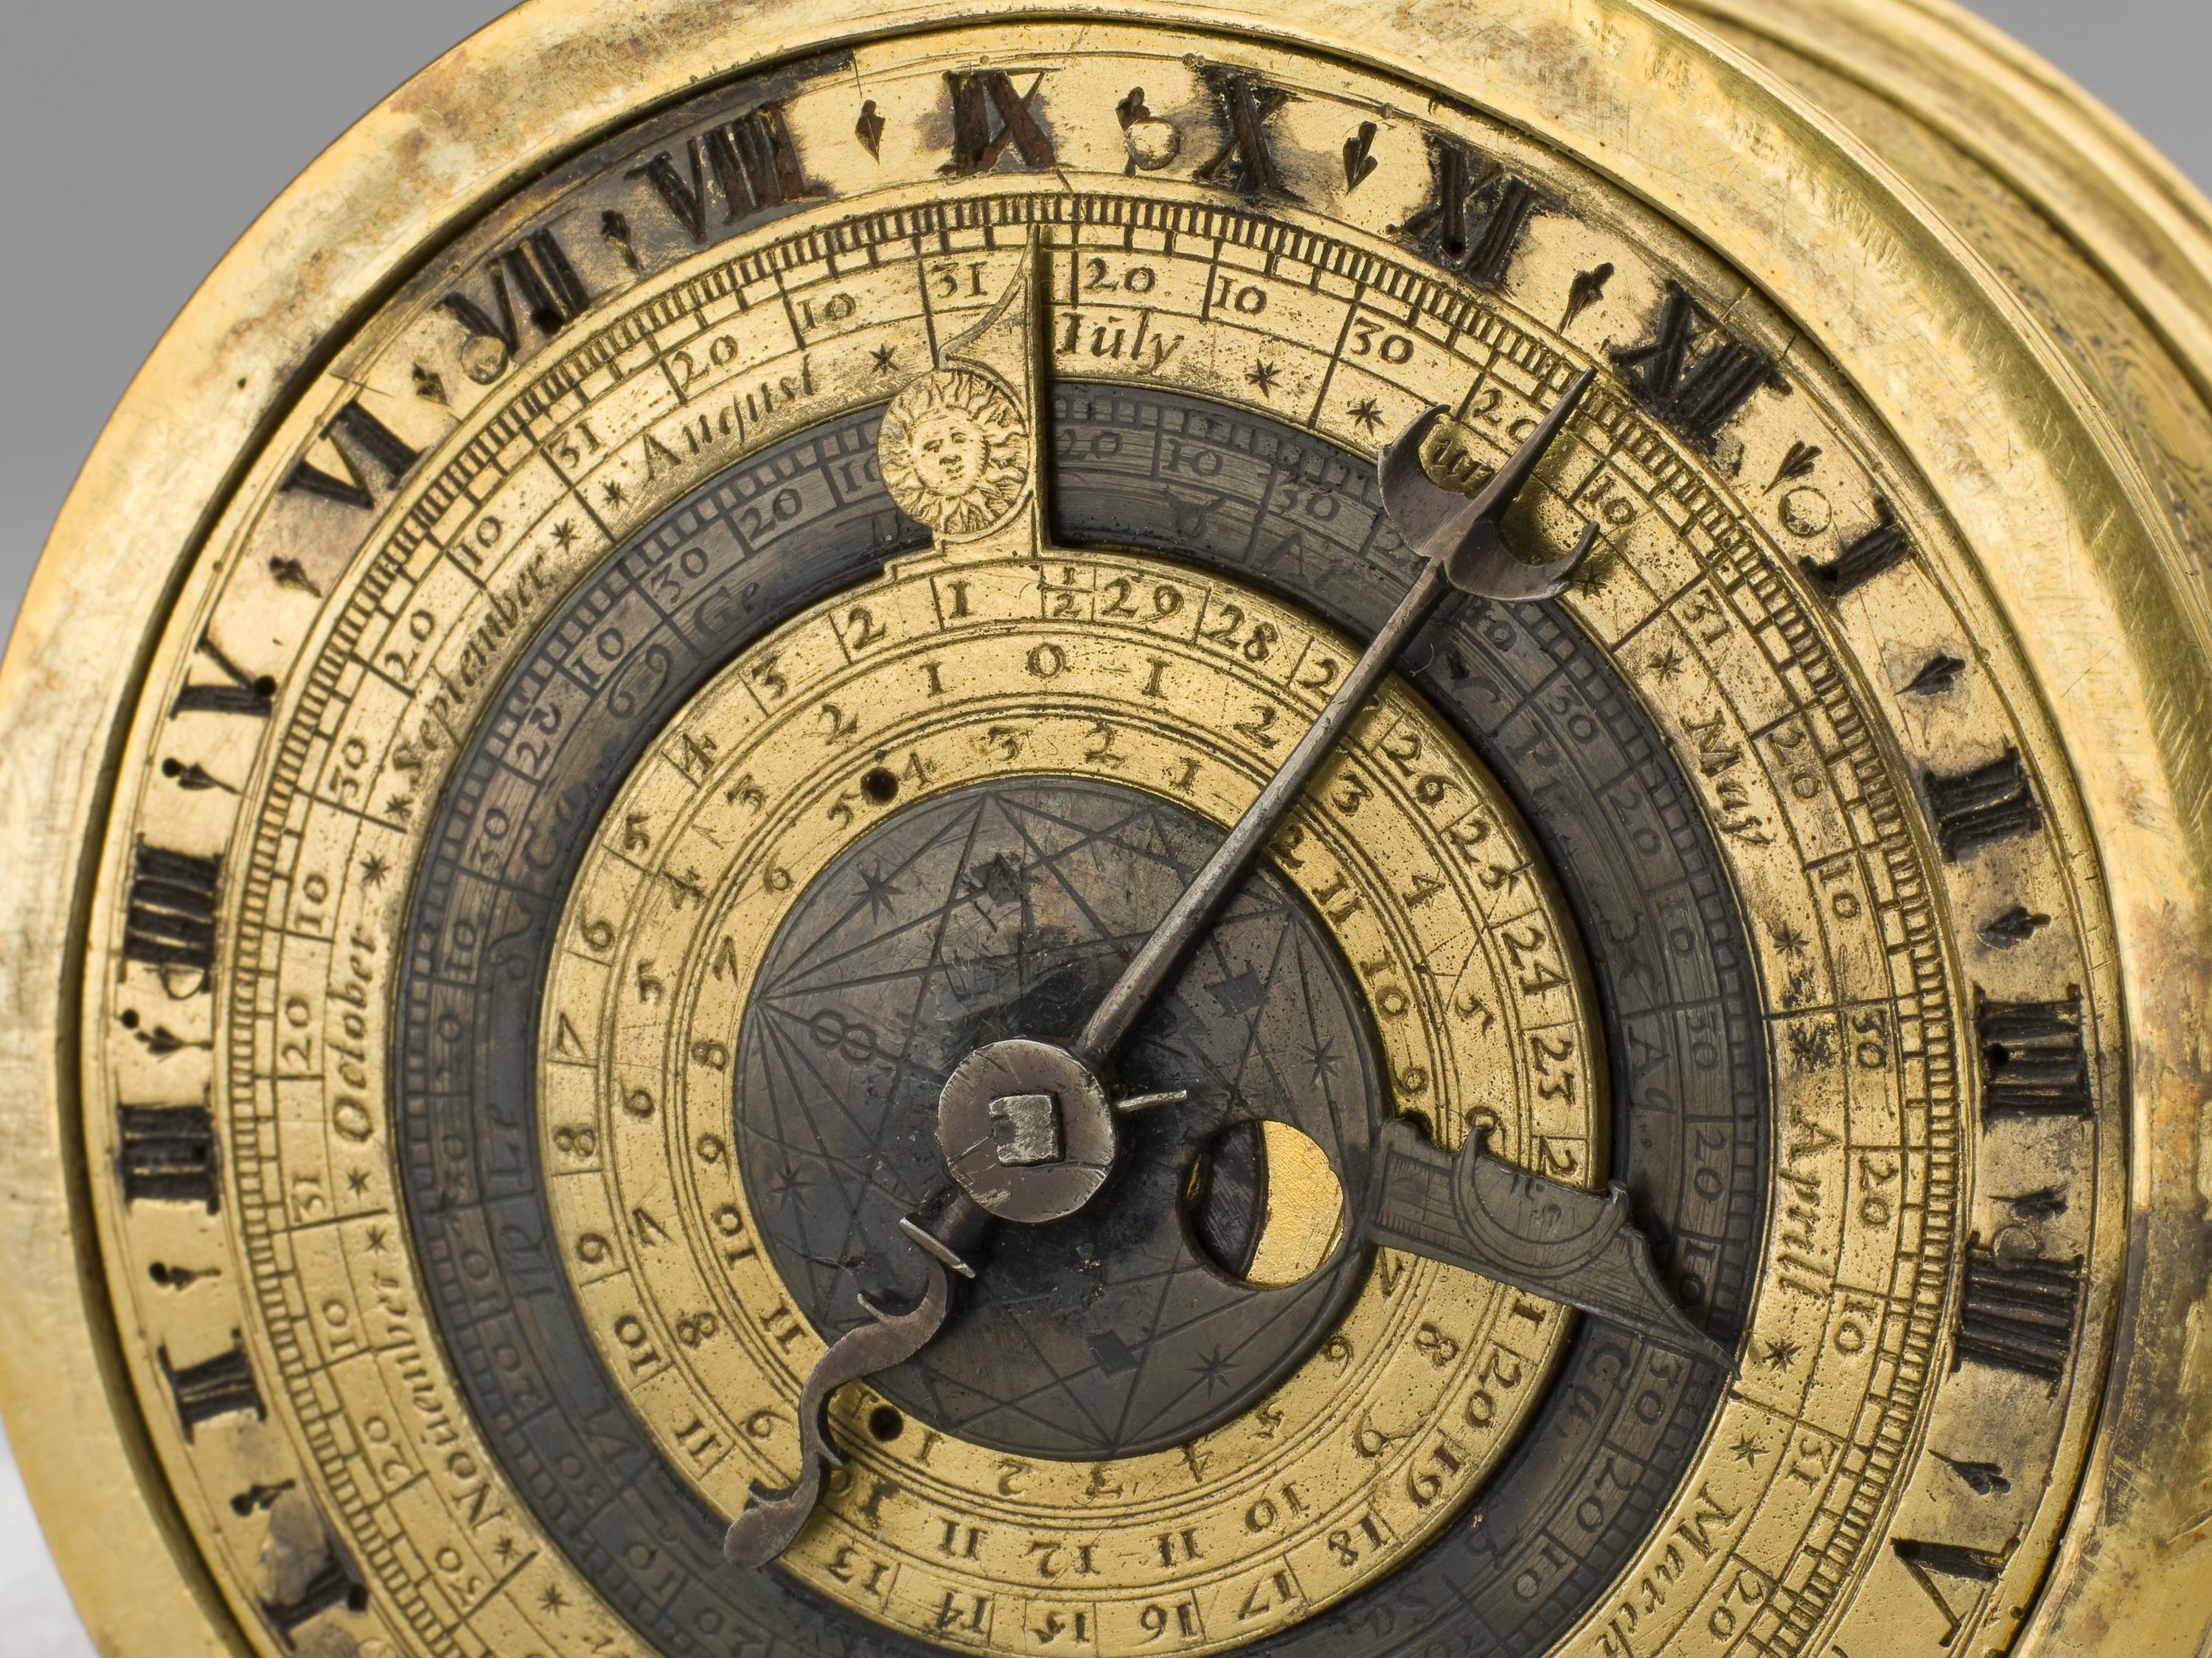 Small round table-clock with astronomical movements by N. Vallin © The Board of Trustees of the Science Museum